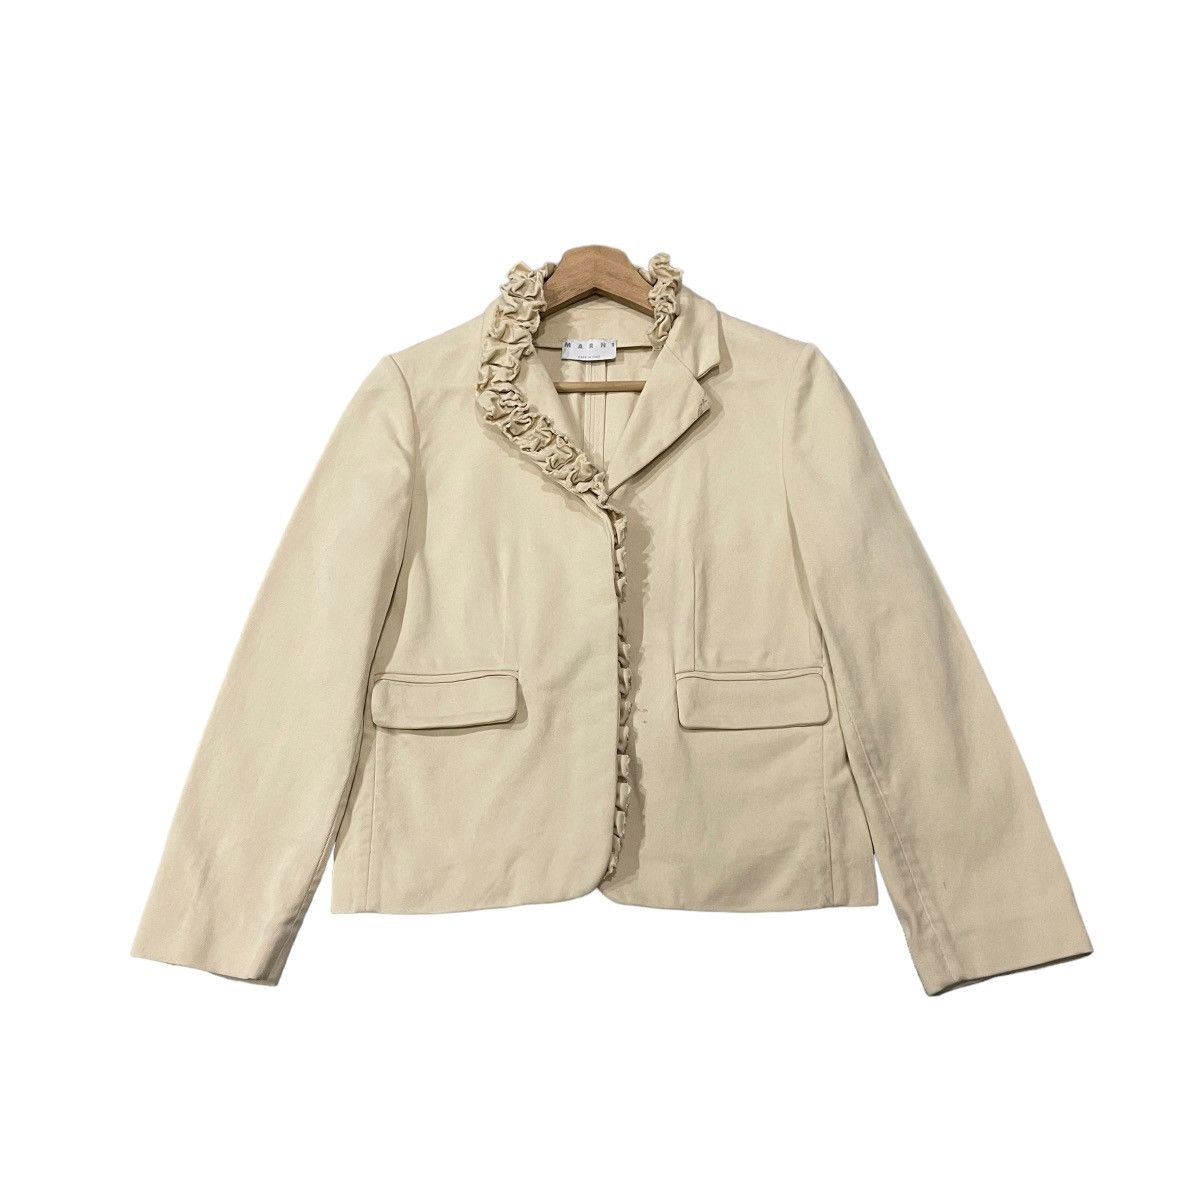 Marni Vintage Marni Made In Italy Cropped Light Jacket | Grailed